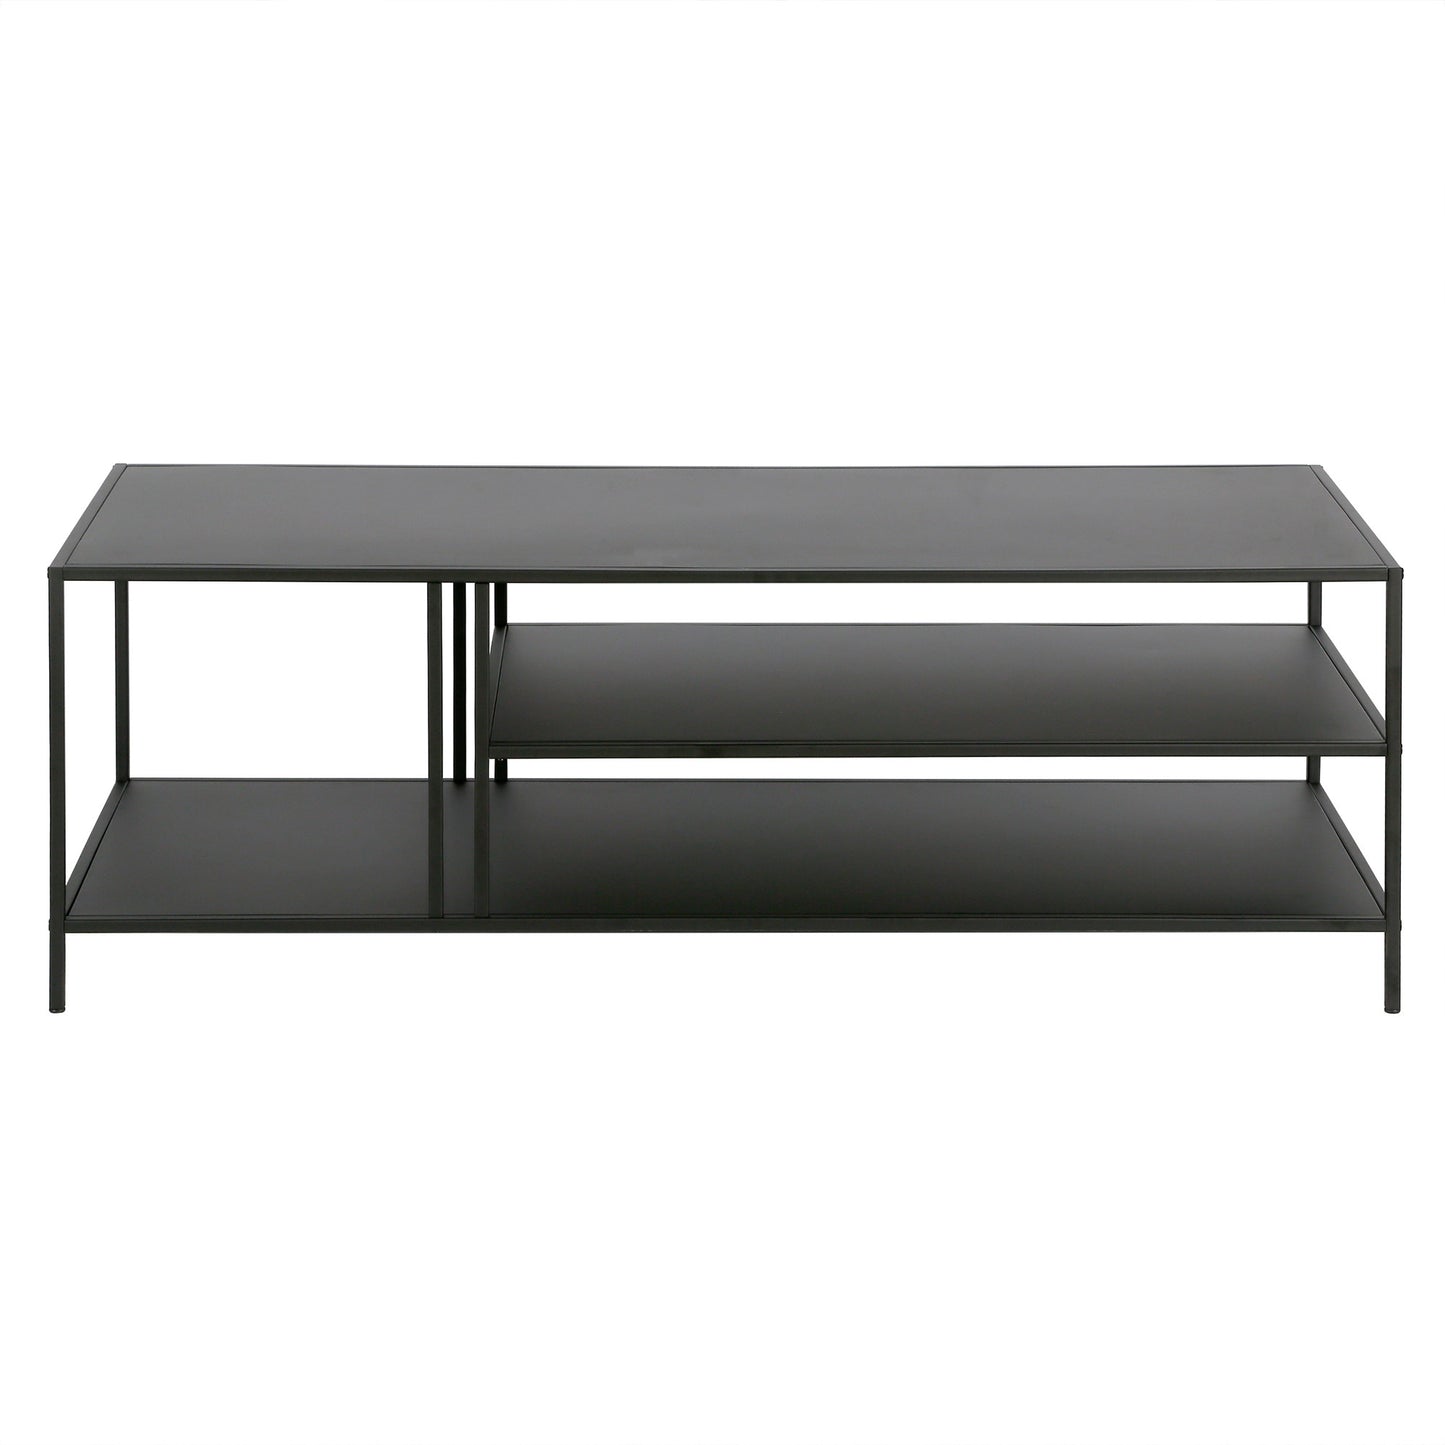 48" Black Steel Coffee Table With Two Shelves